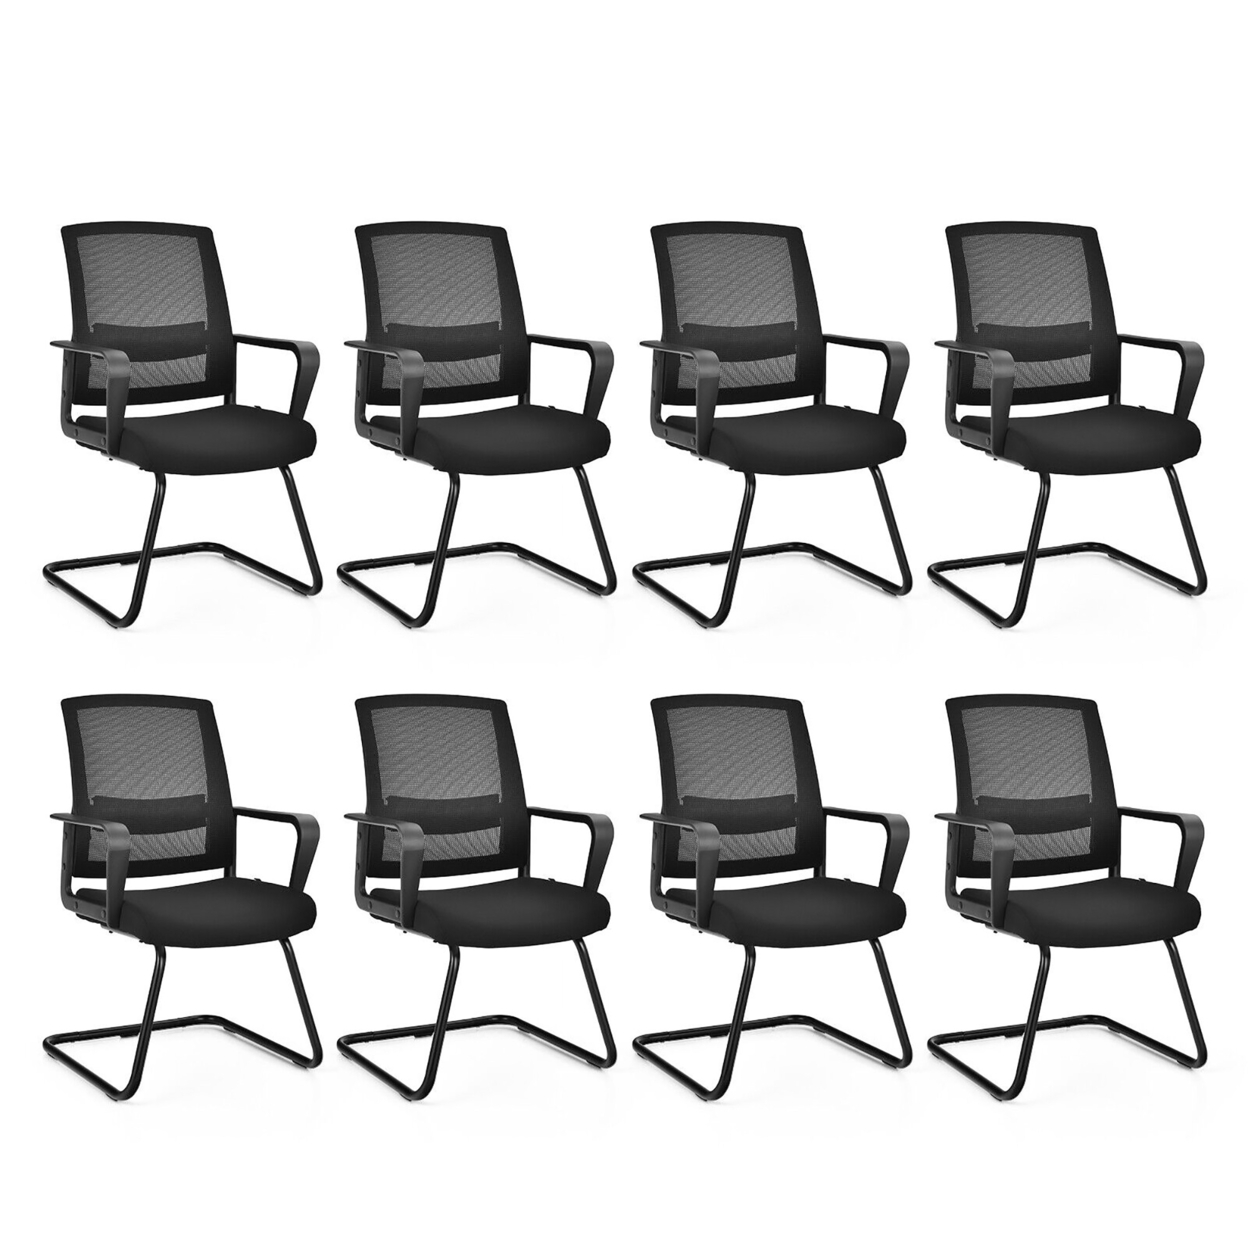 Set Of 8 Conference Chairs Mesh Reception Office Guest Chairs W/ Lumbar Support